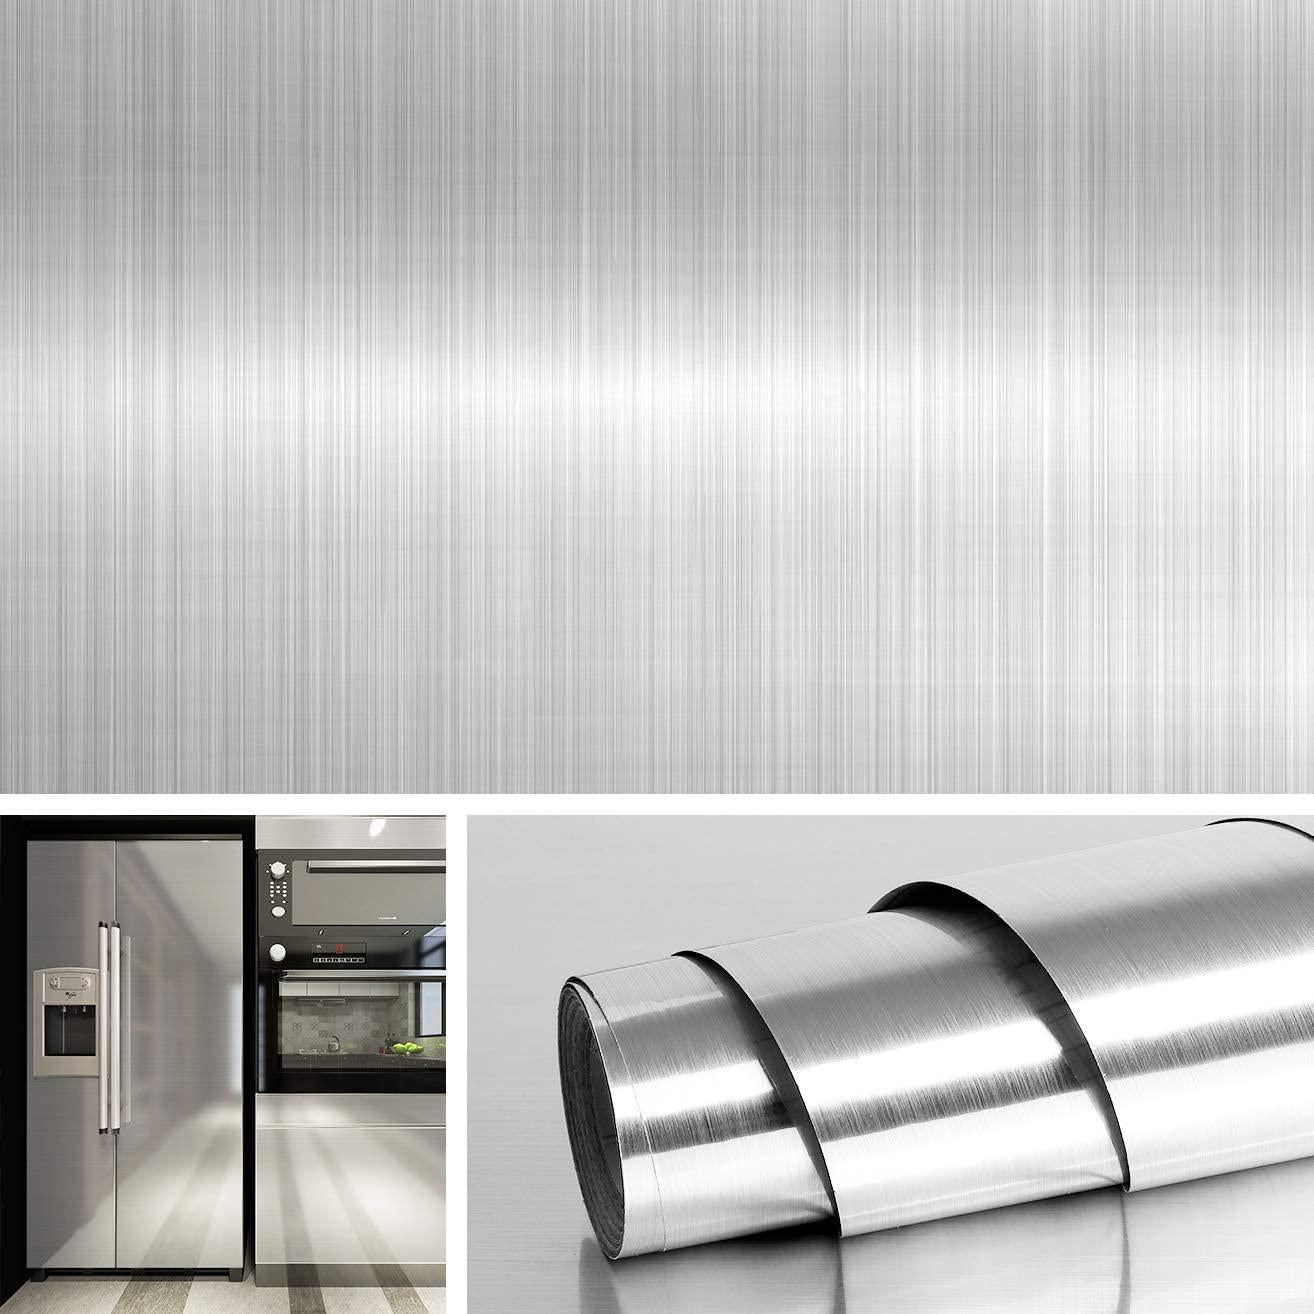 Livelynine, Livelynine Brushed Nickel Vinyl Peel and Stick Wallpaper Decorative Stainless Steel Contact Paper for Countertops Kitchen Cabinets Appliances Dishwasher Fridge Refrigerator Stove Covers 15.8x78.8 Inch